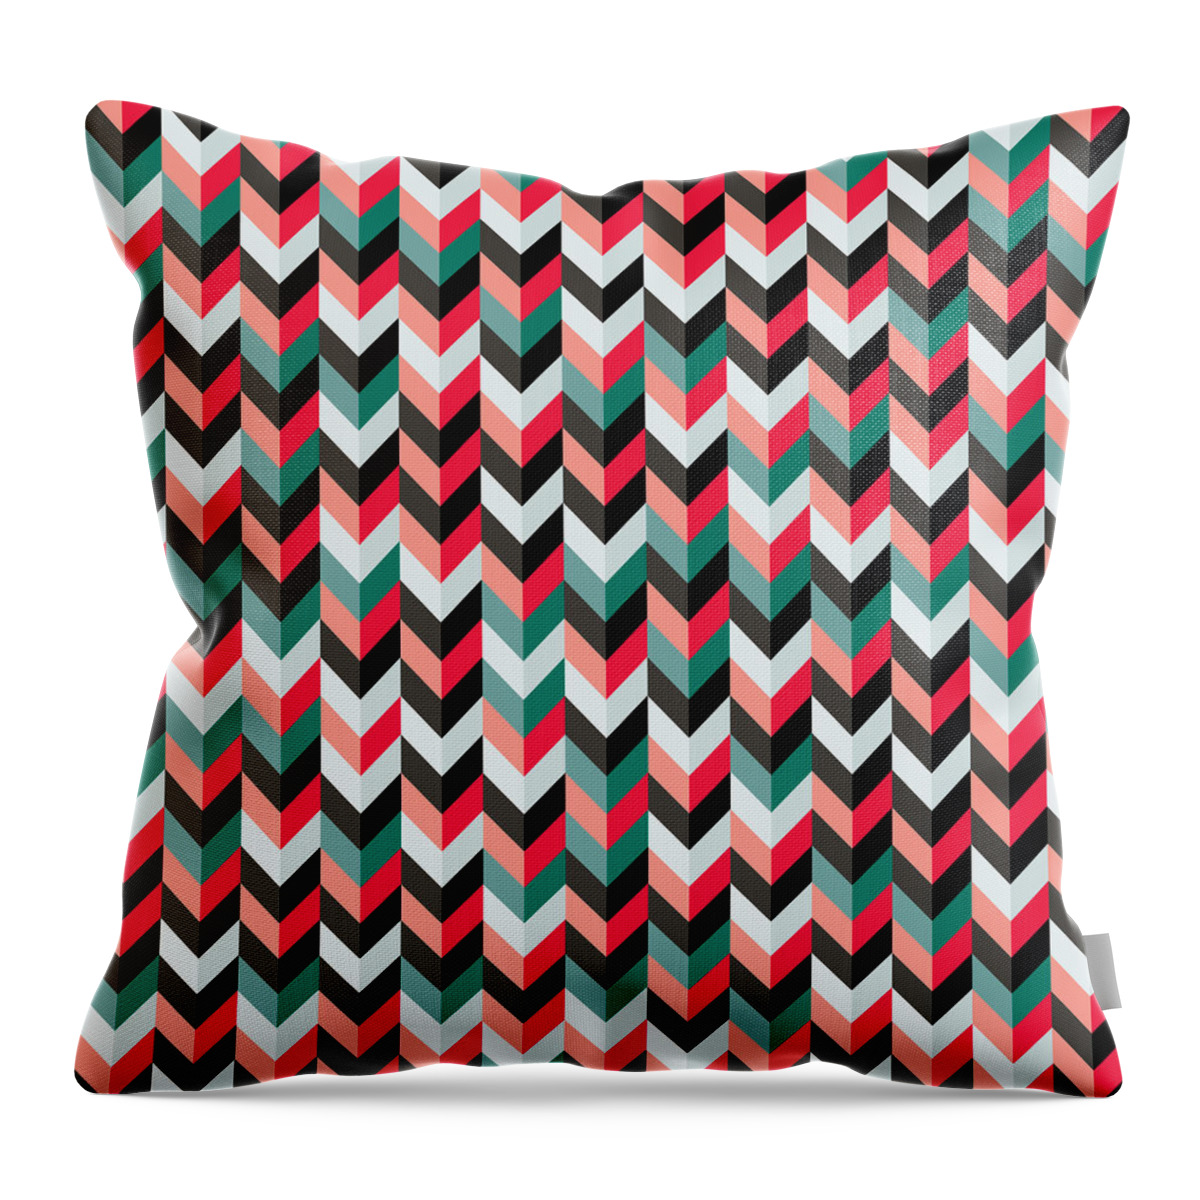 Abstract Throw Pillow featuring the digital art Chevron by Mike Taylor